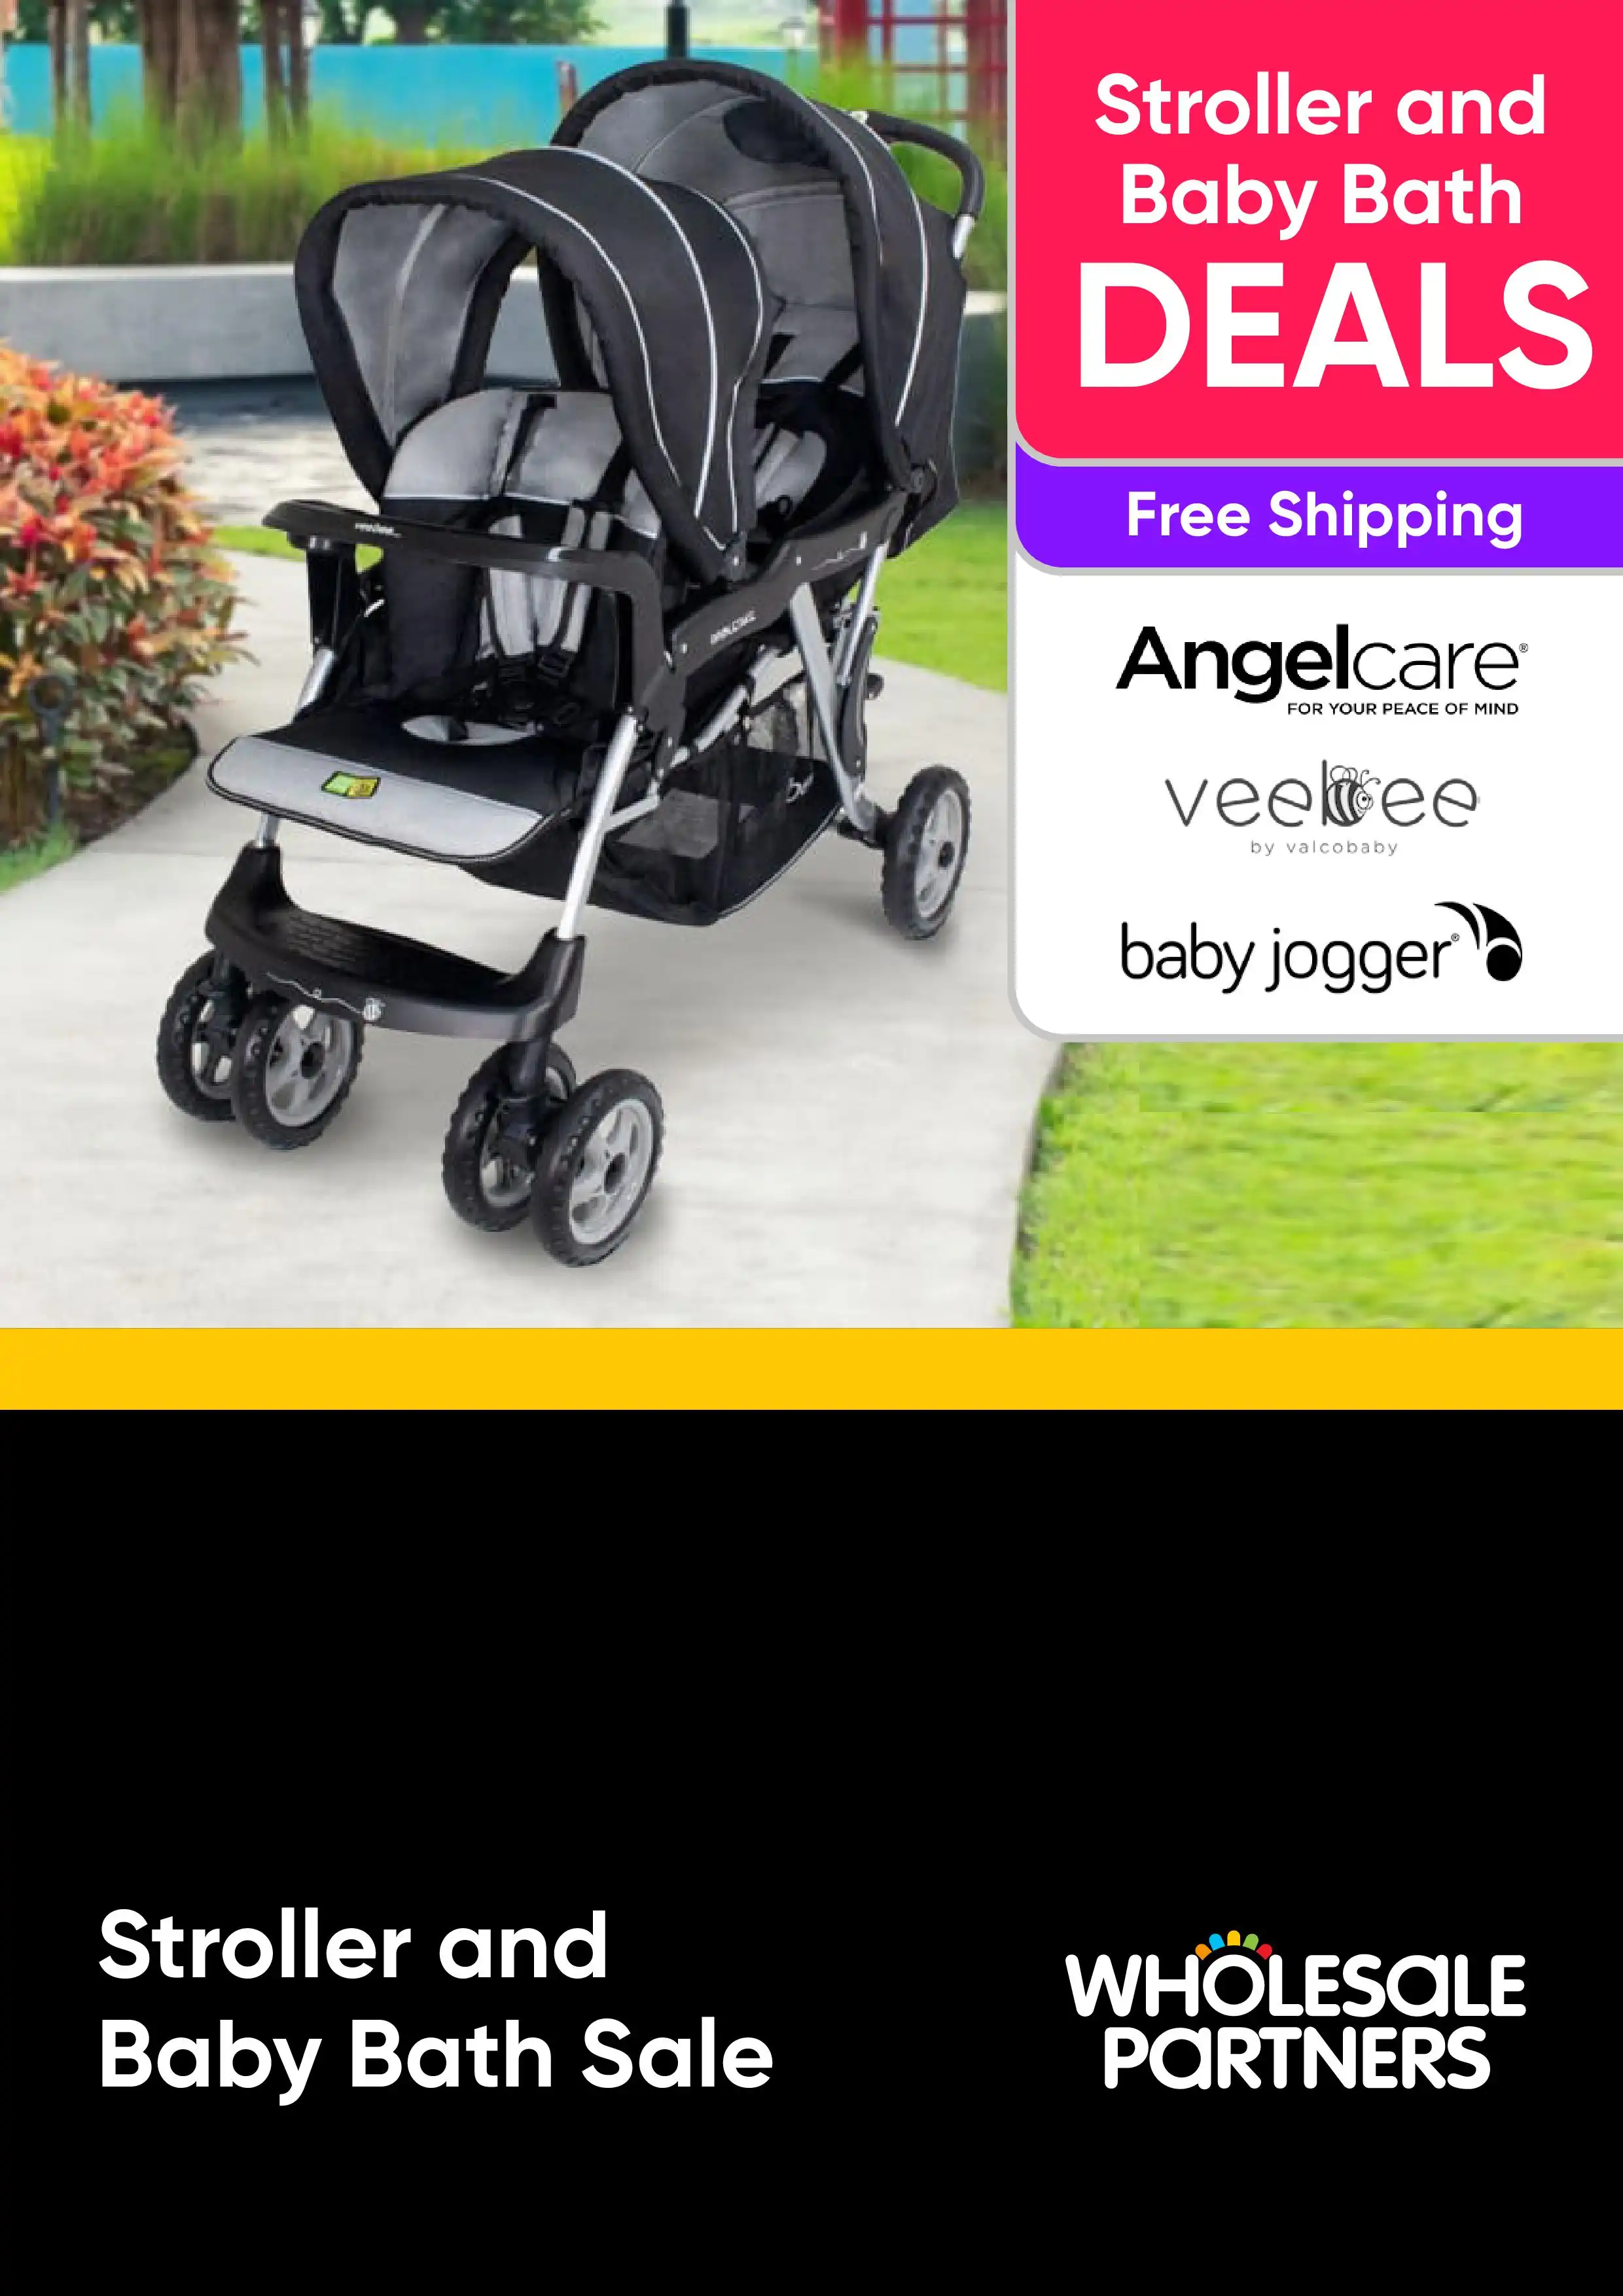 Stroller and Baby Bath Sale - Angelcare, VeeBee, Baby Jogger - Free Shipping